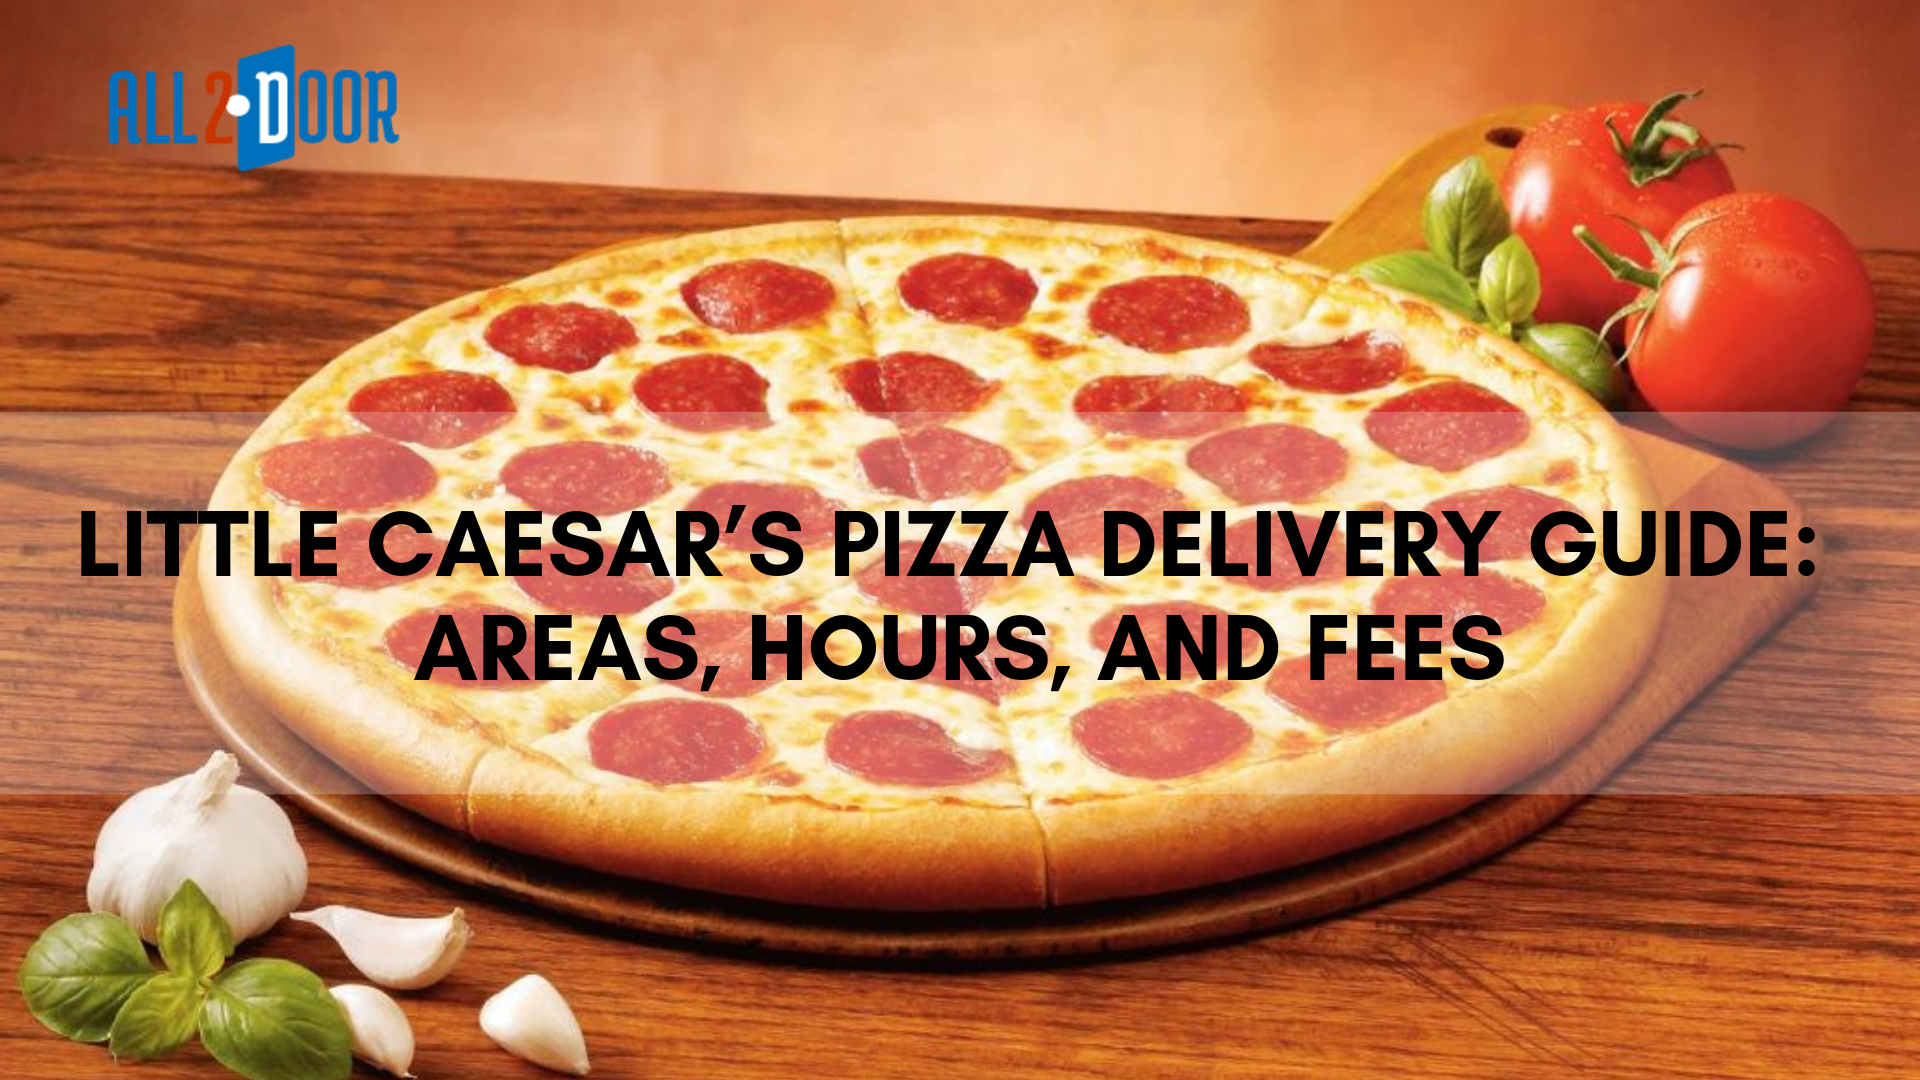 Little Caesar’s Pizza Delivery Guide Areas, Hours, and Fees